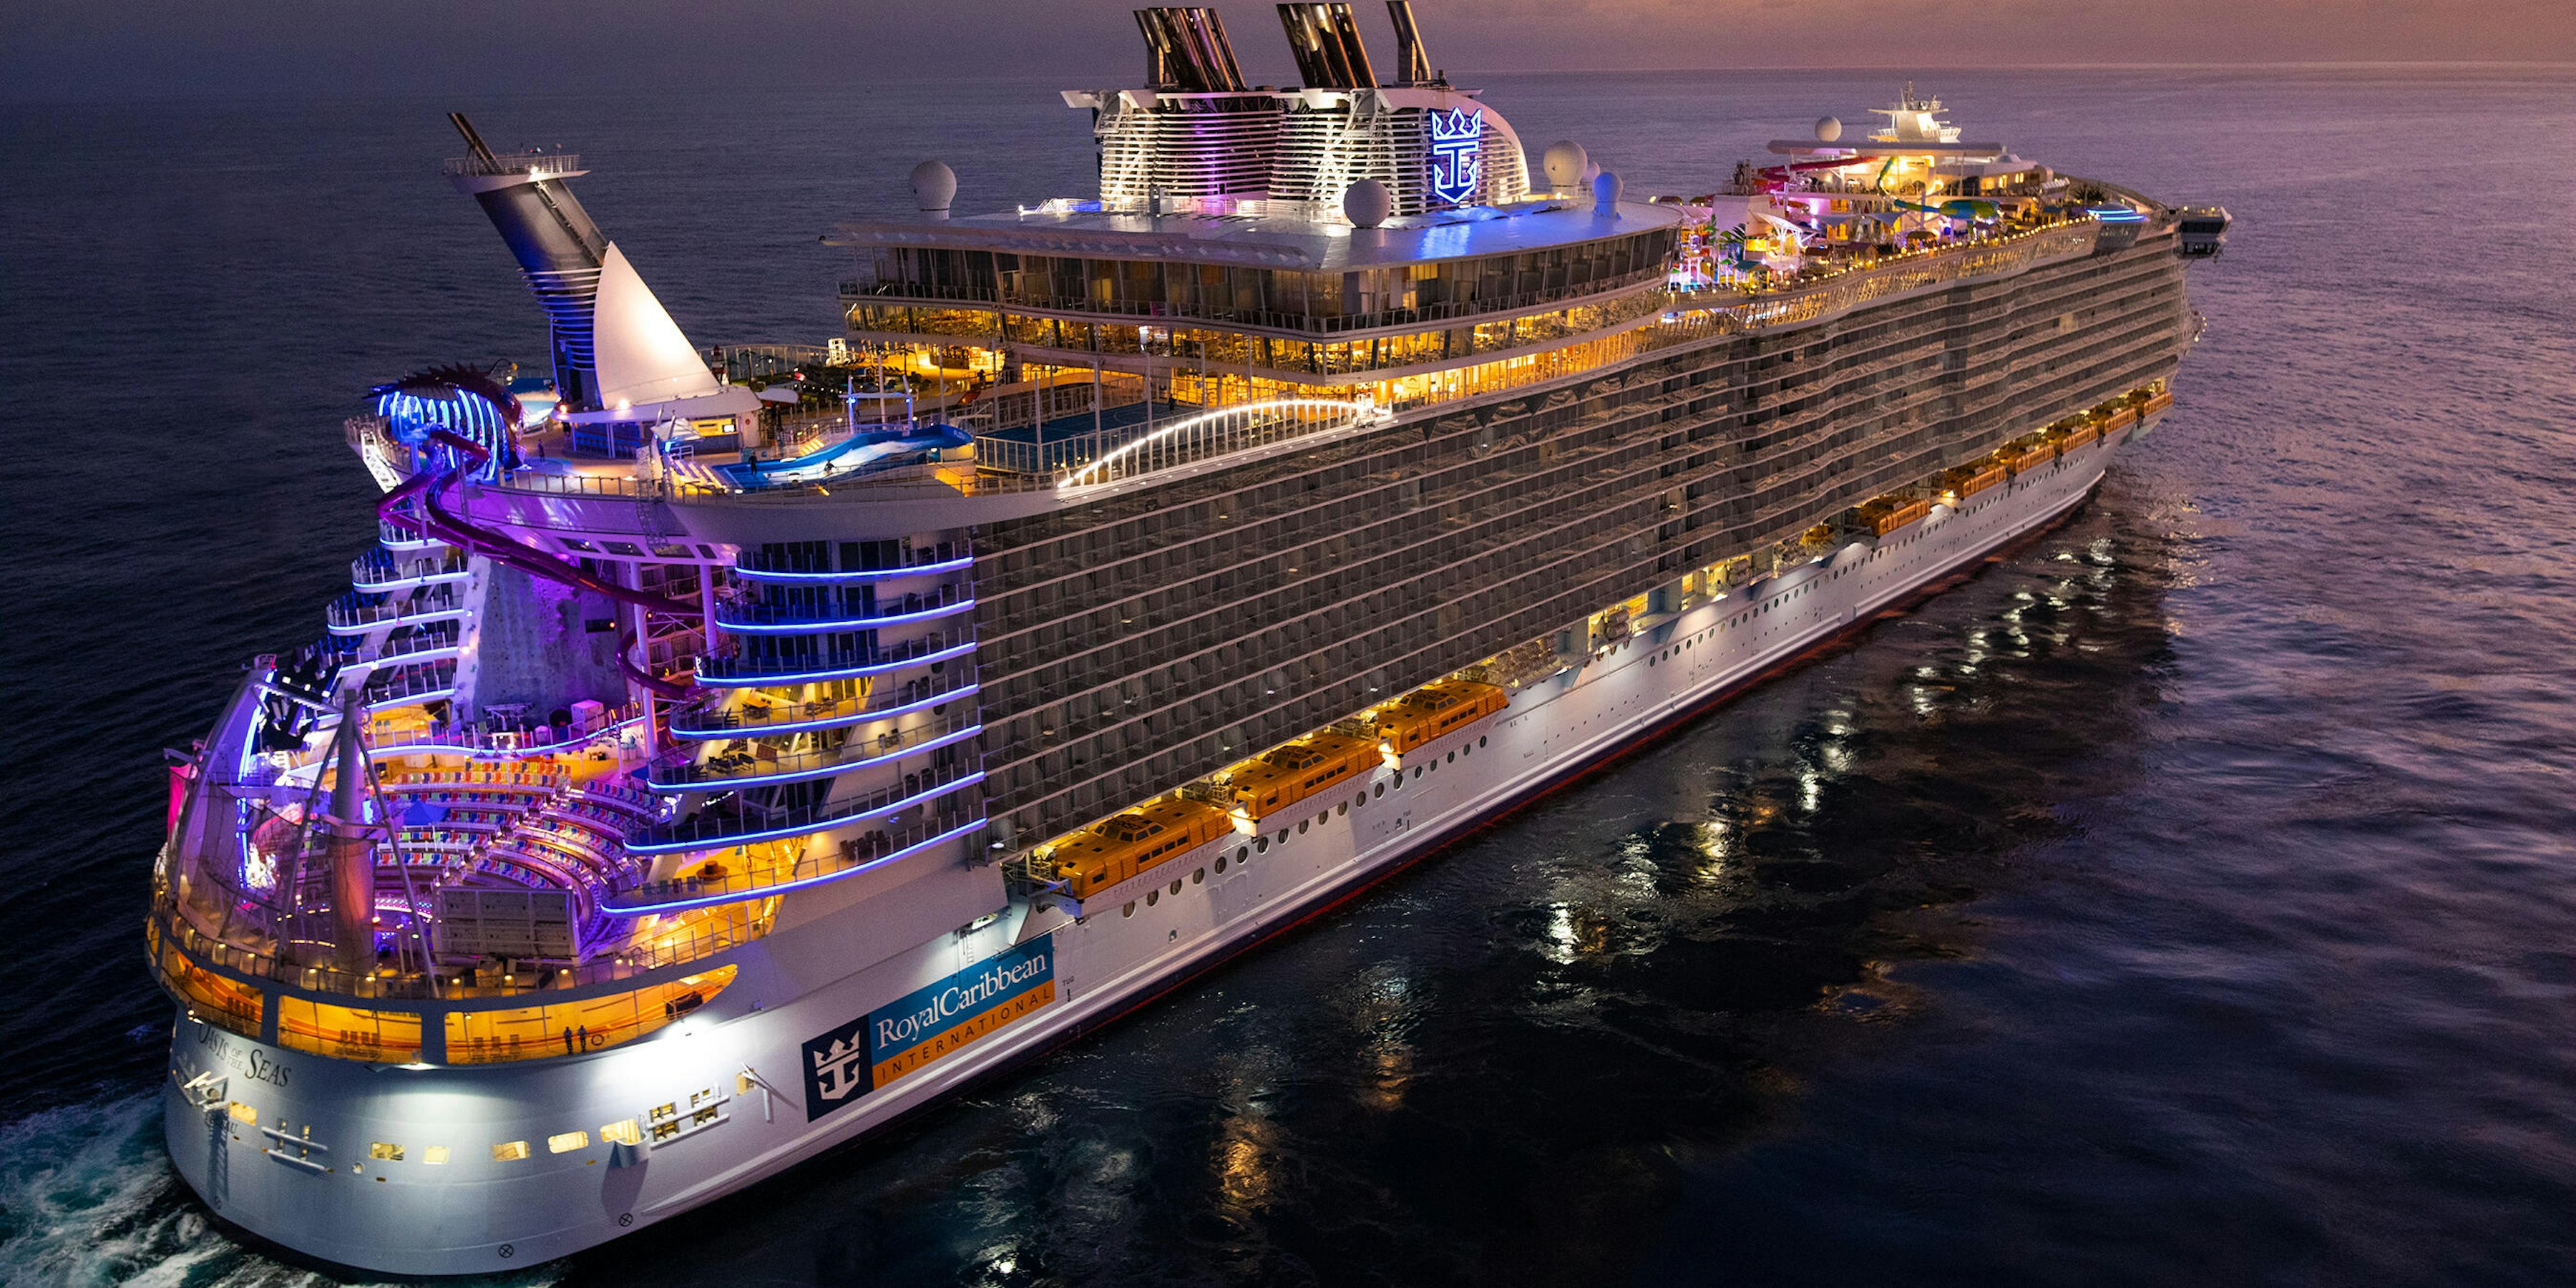 Why Royal Caribbean's Oasis of the Seas Cruise Ship Was (and Still Is